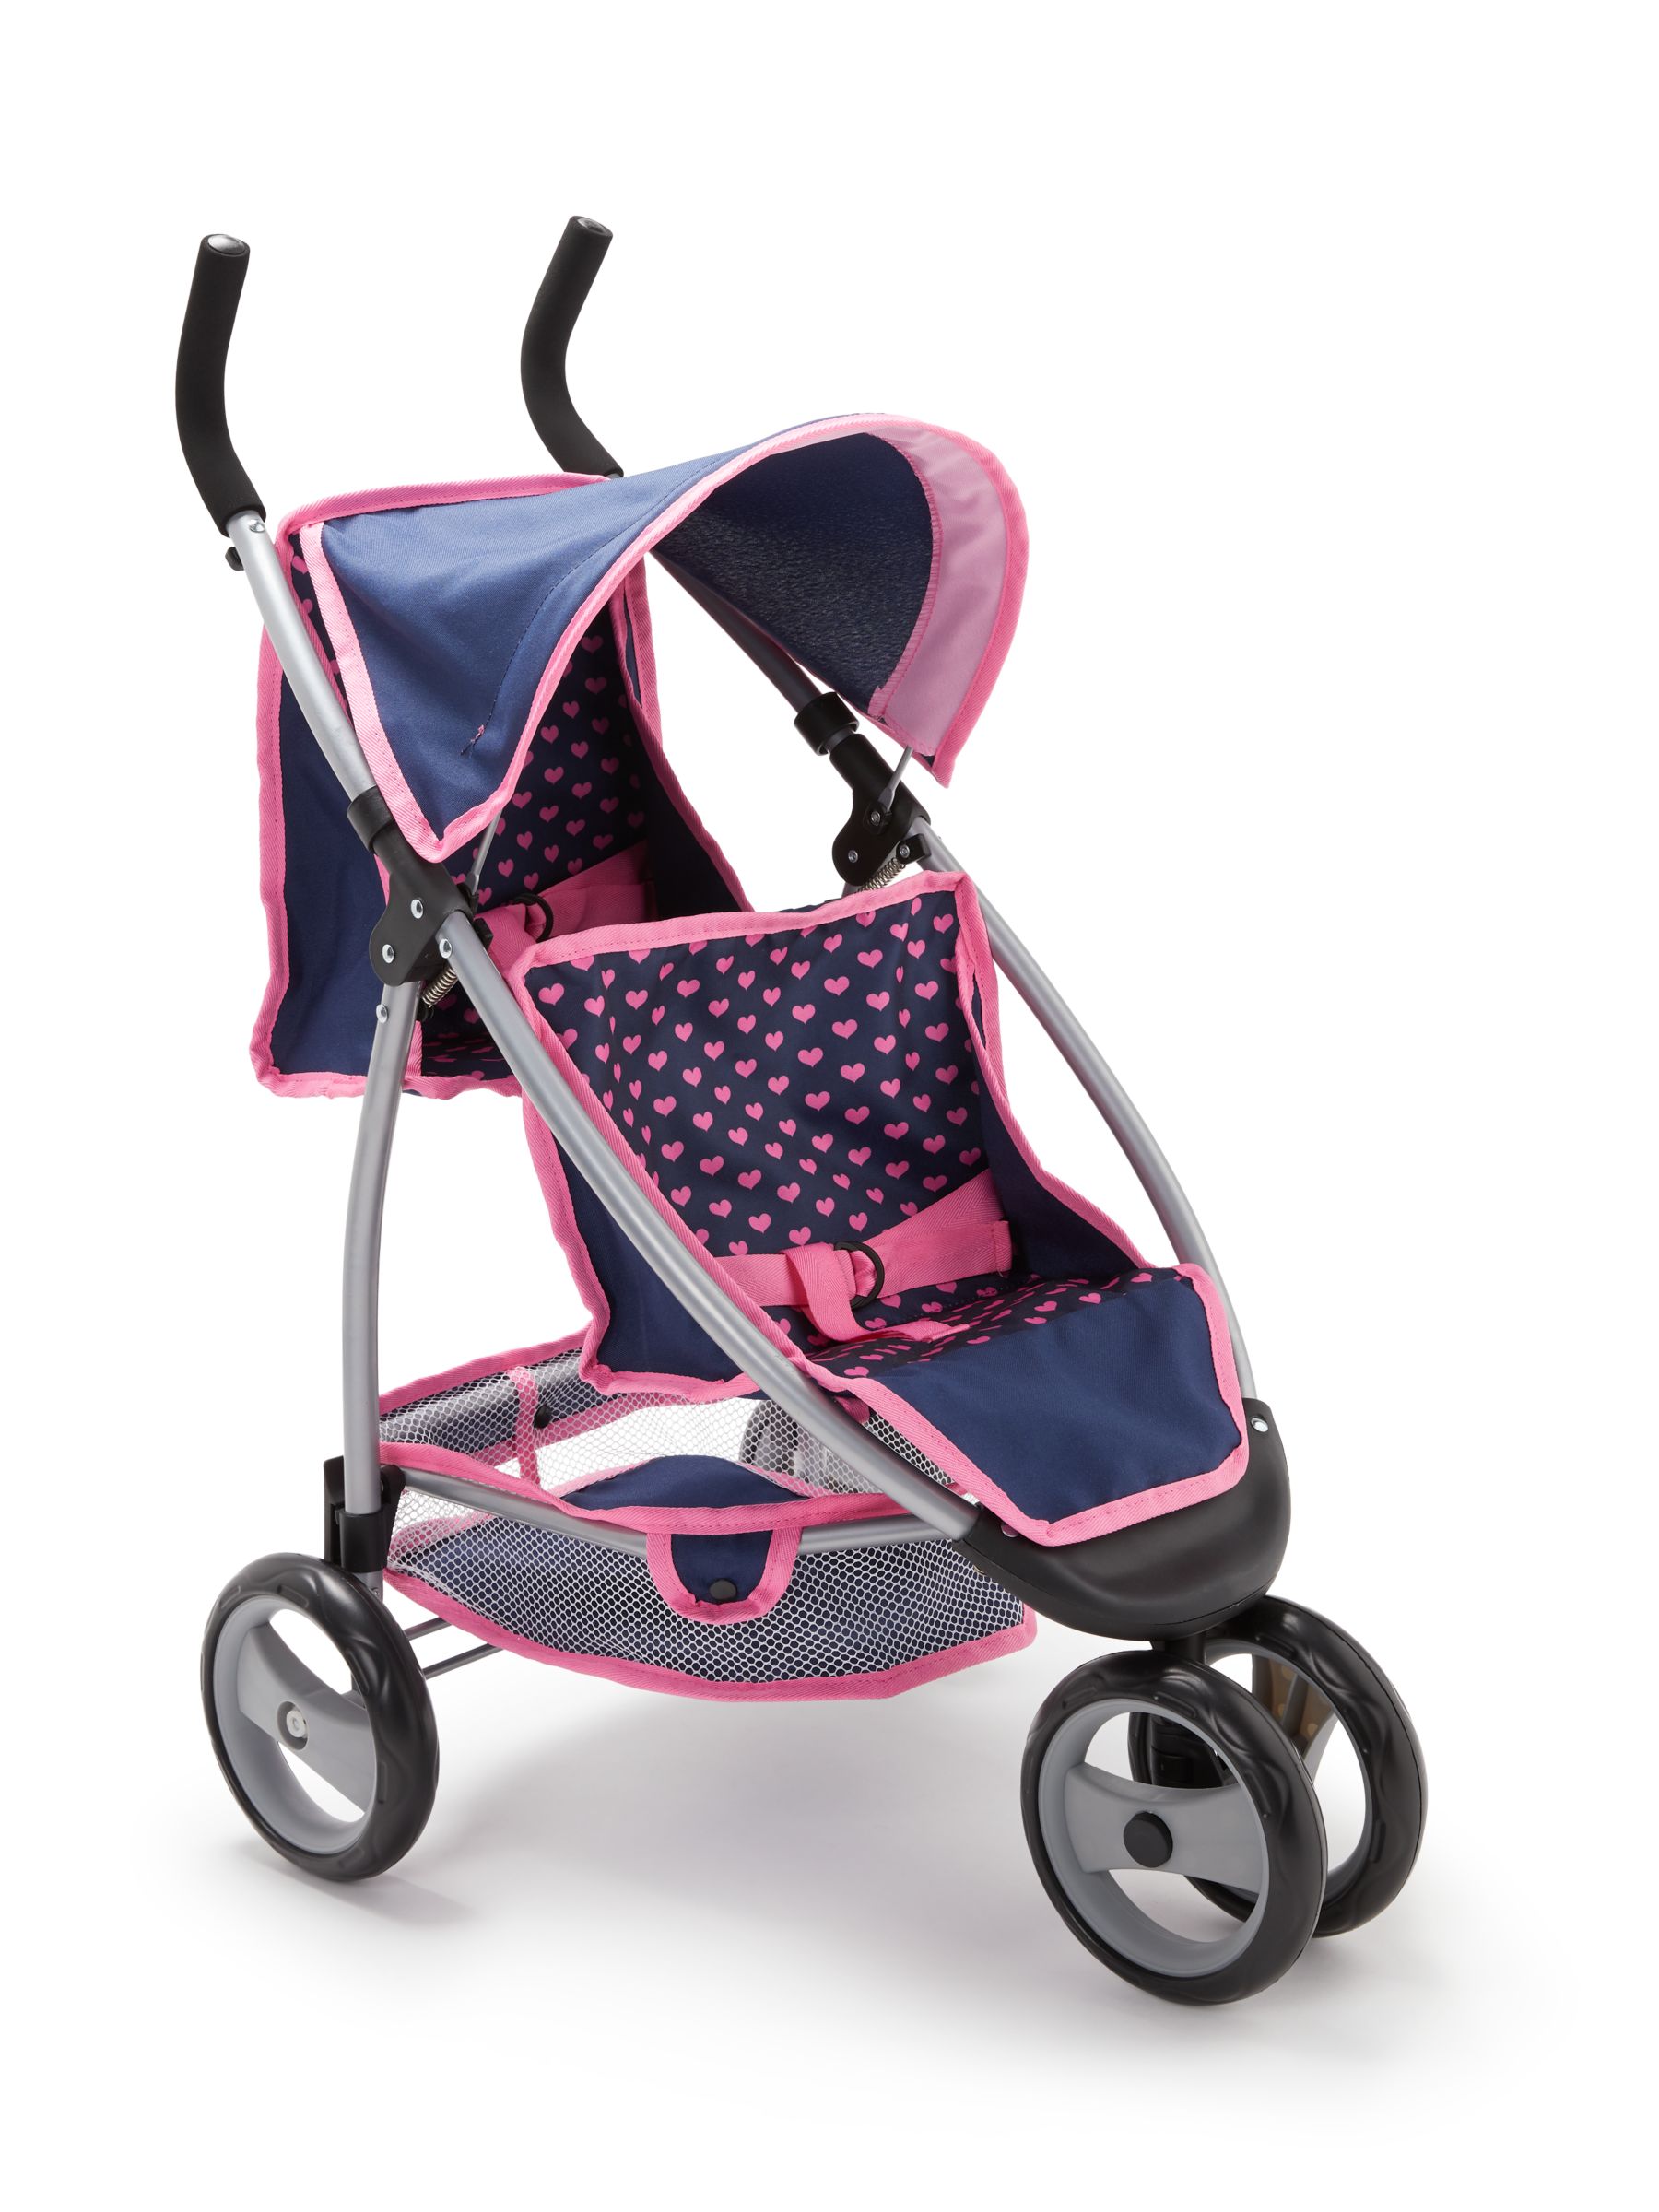 children's play double buggy